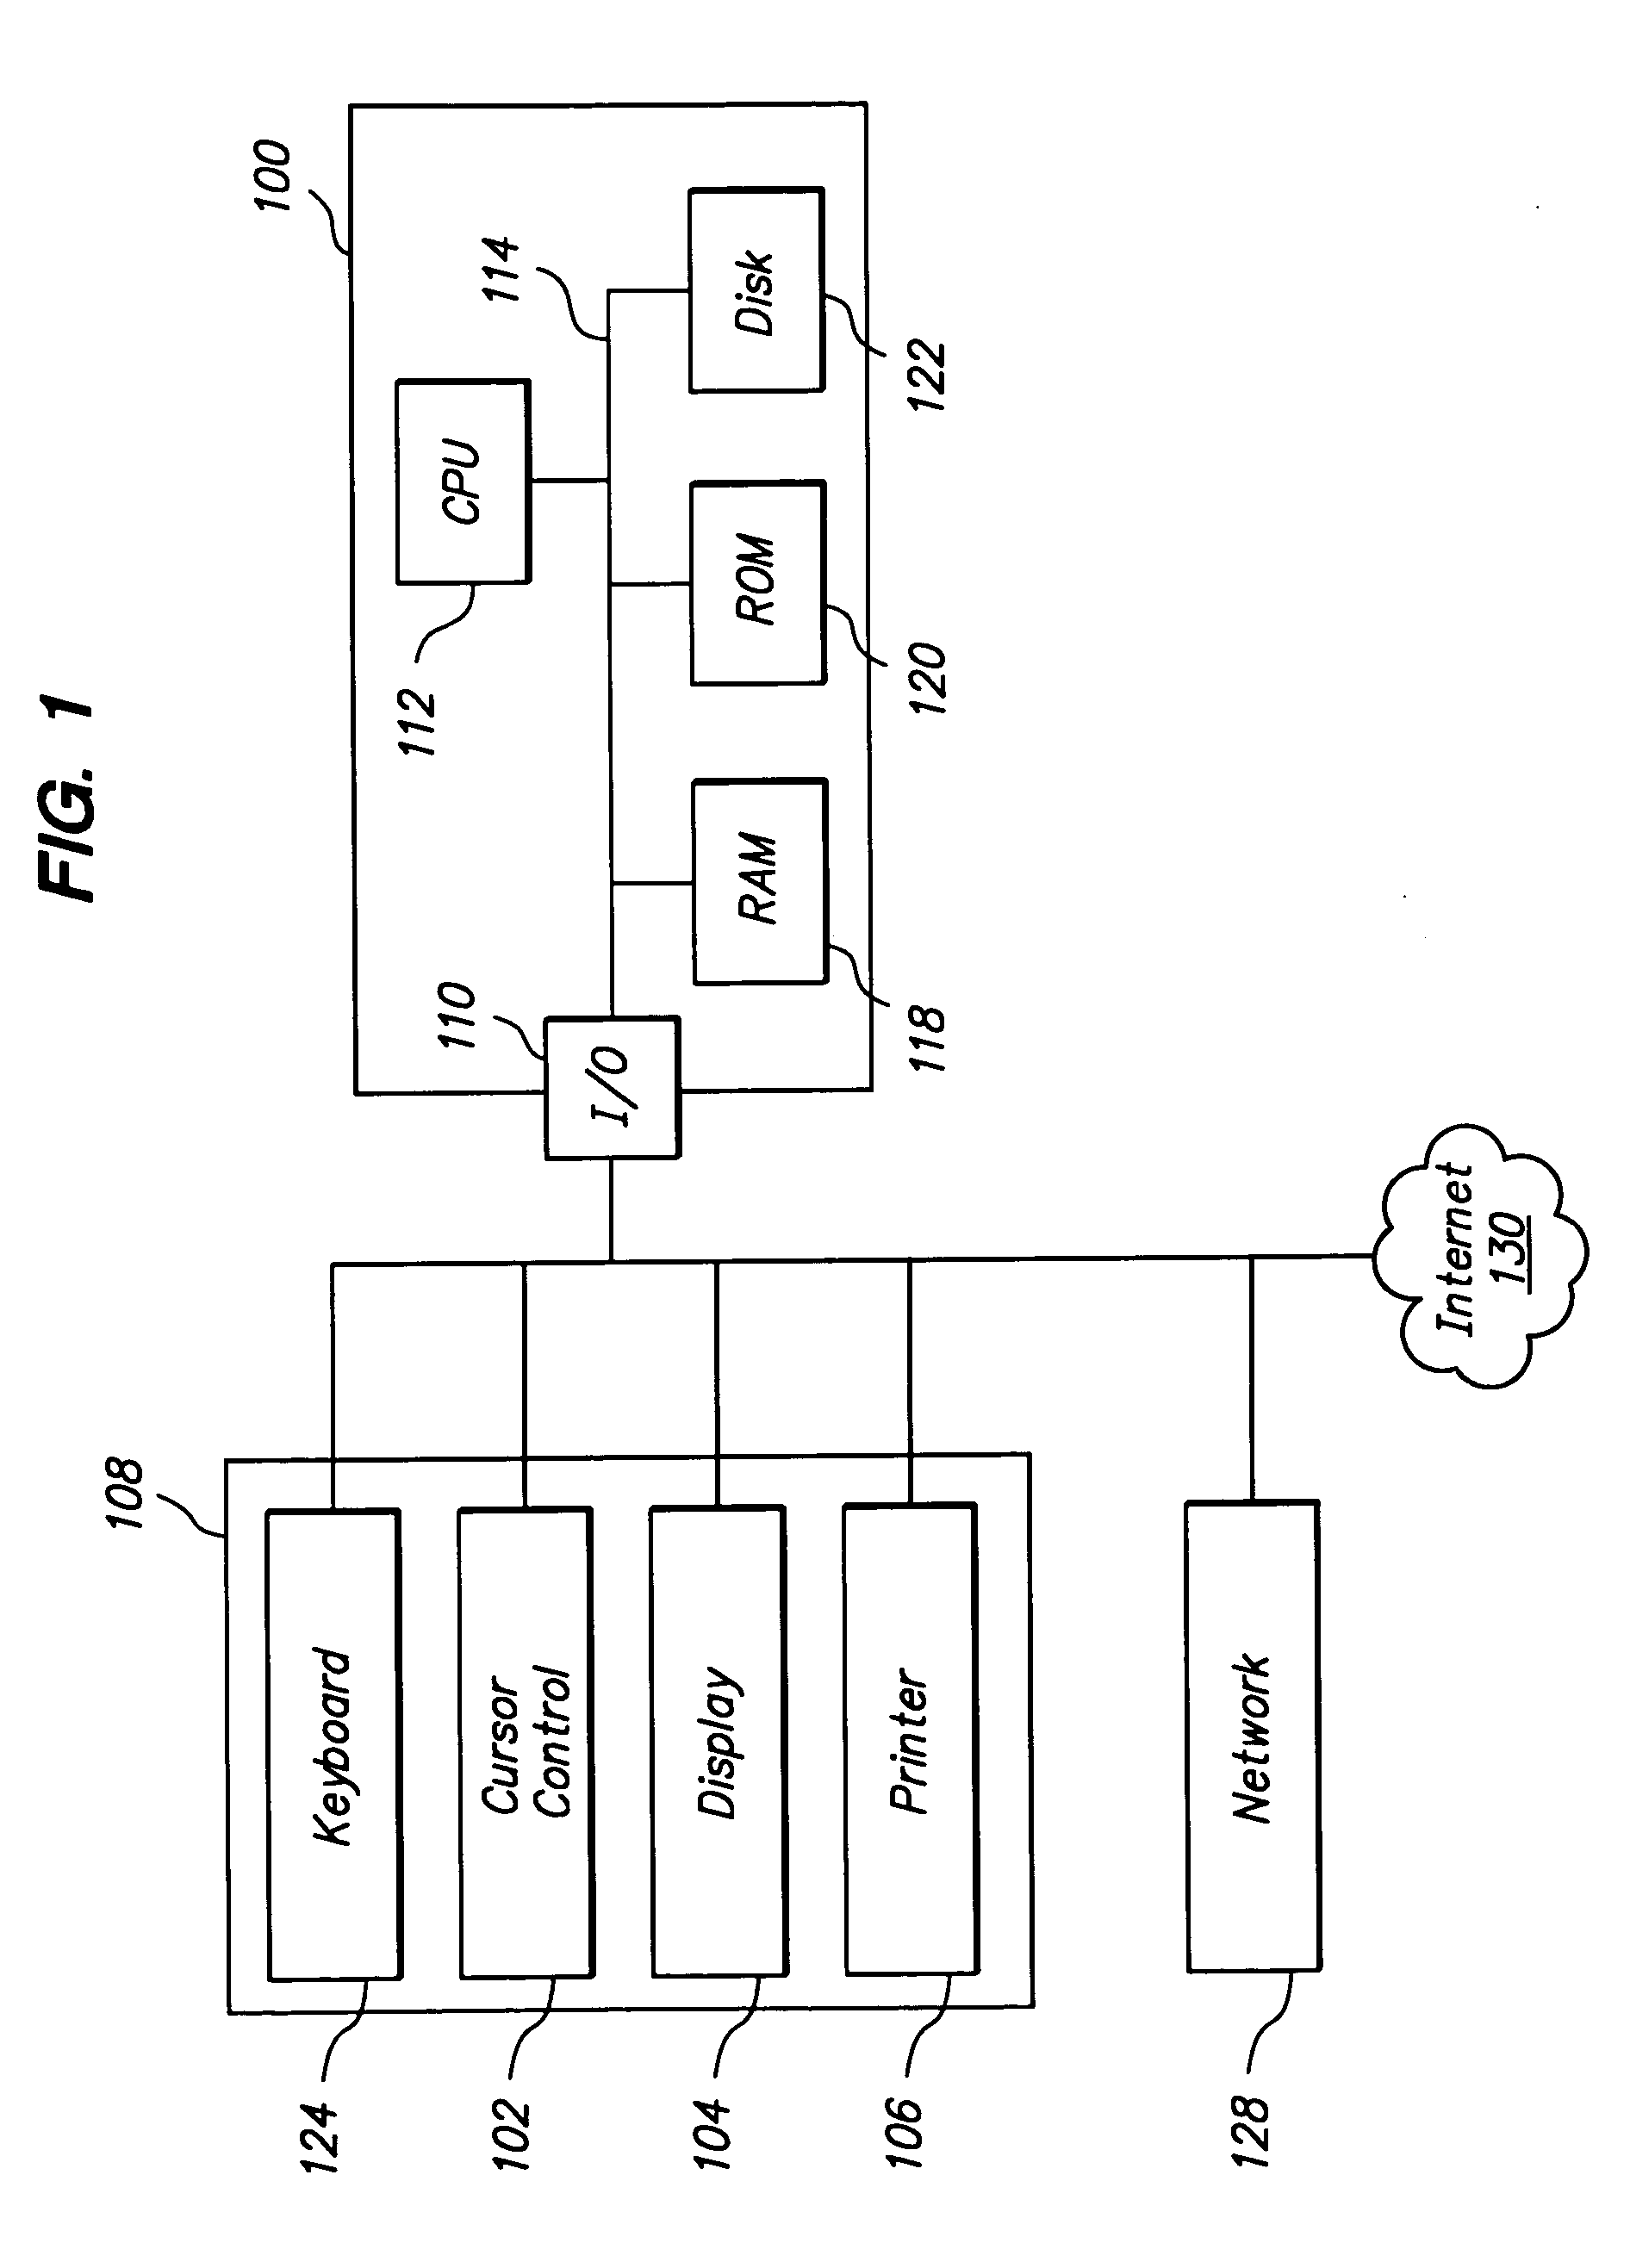 Method and apparatus for automatic file clustering into a data-driven, user-specific taxonomy